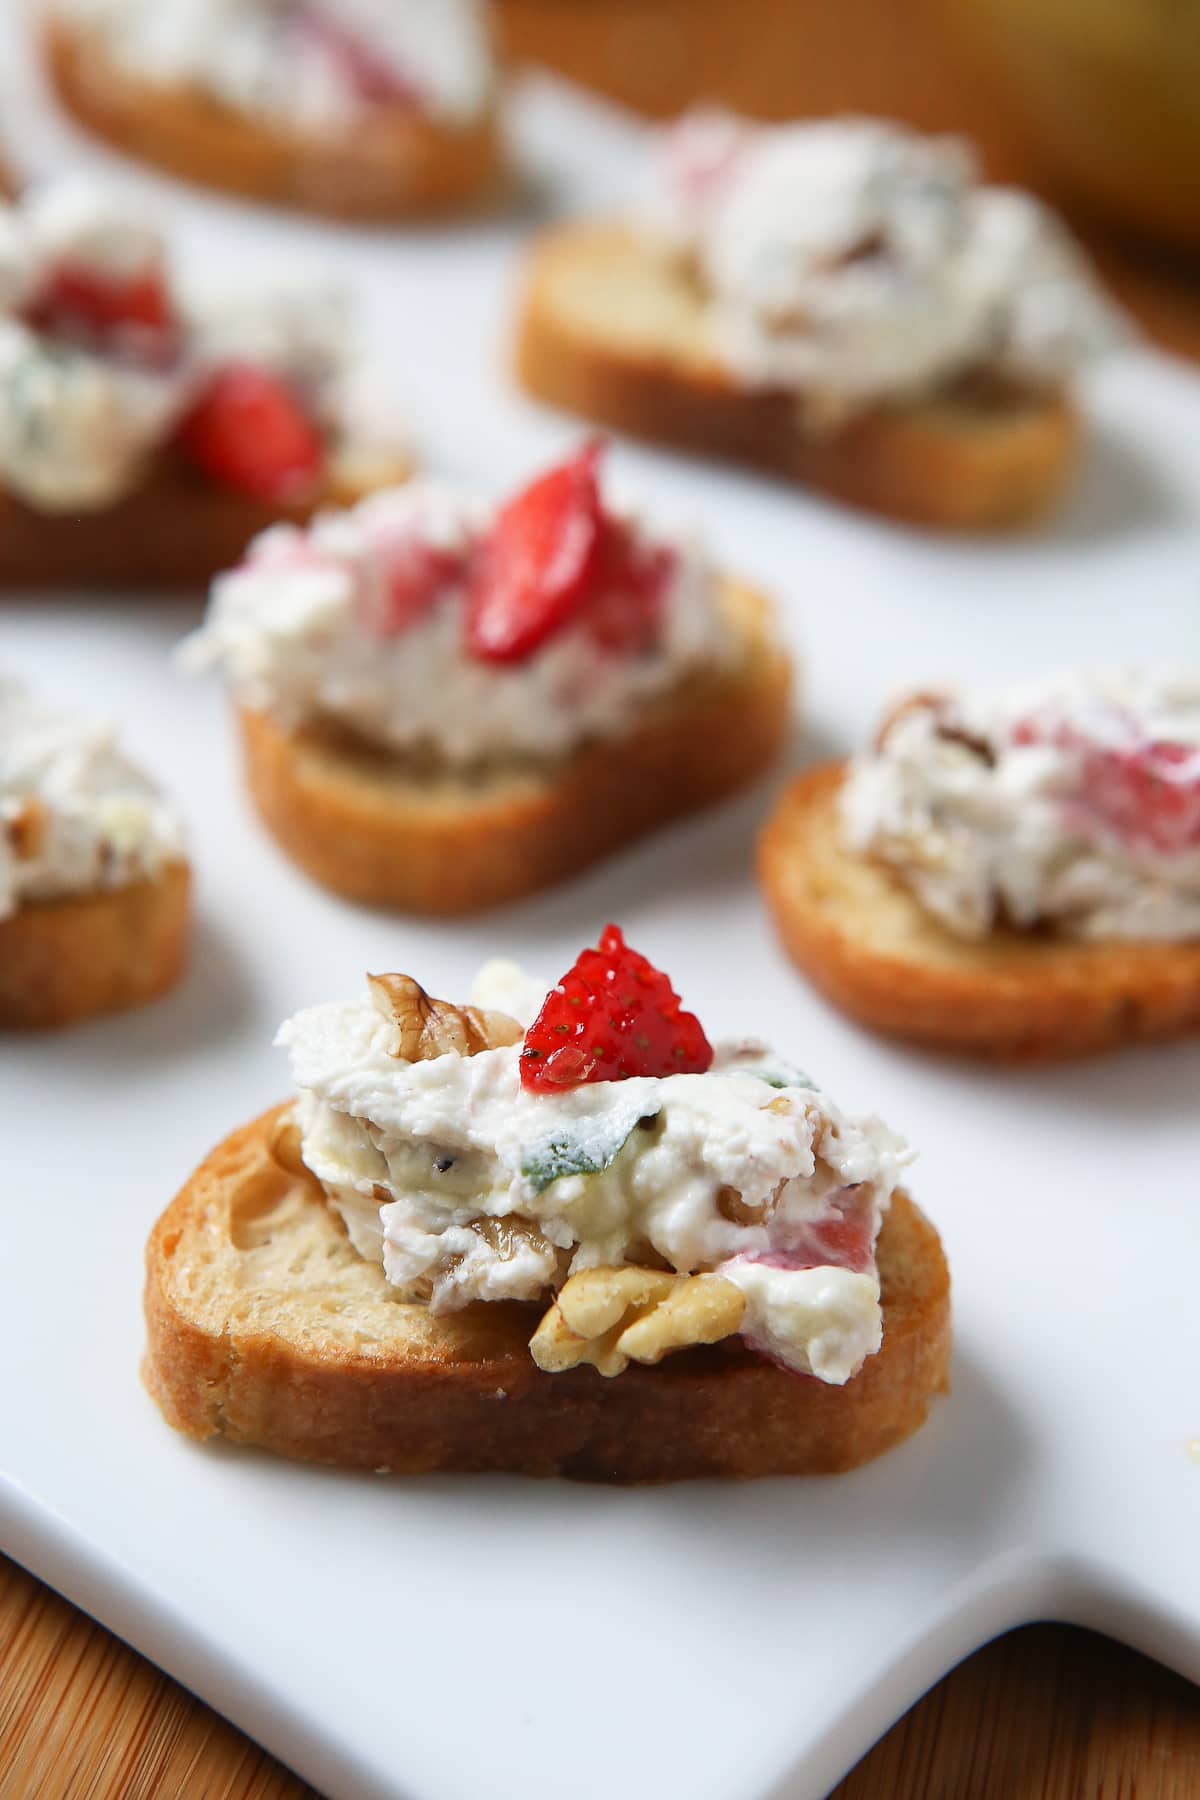 Strawberry Basil Goat Cheese Spread with Walnuts